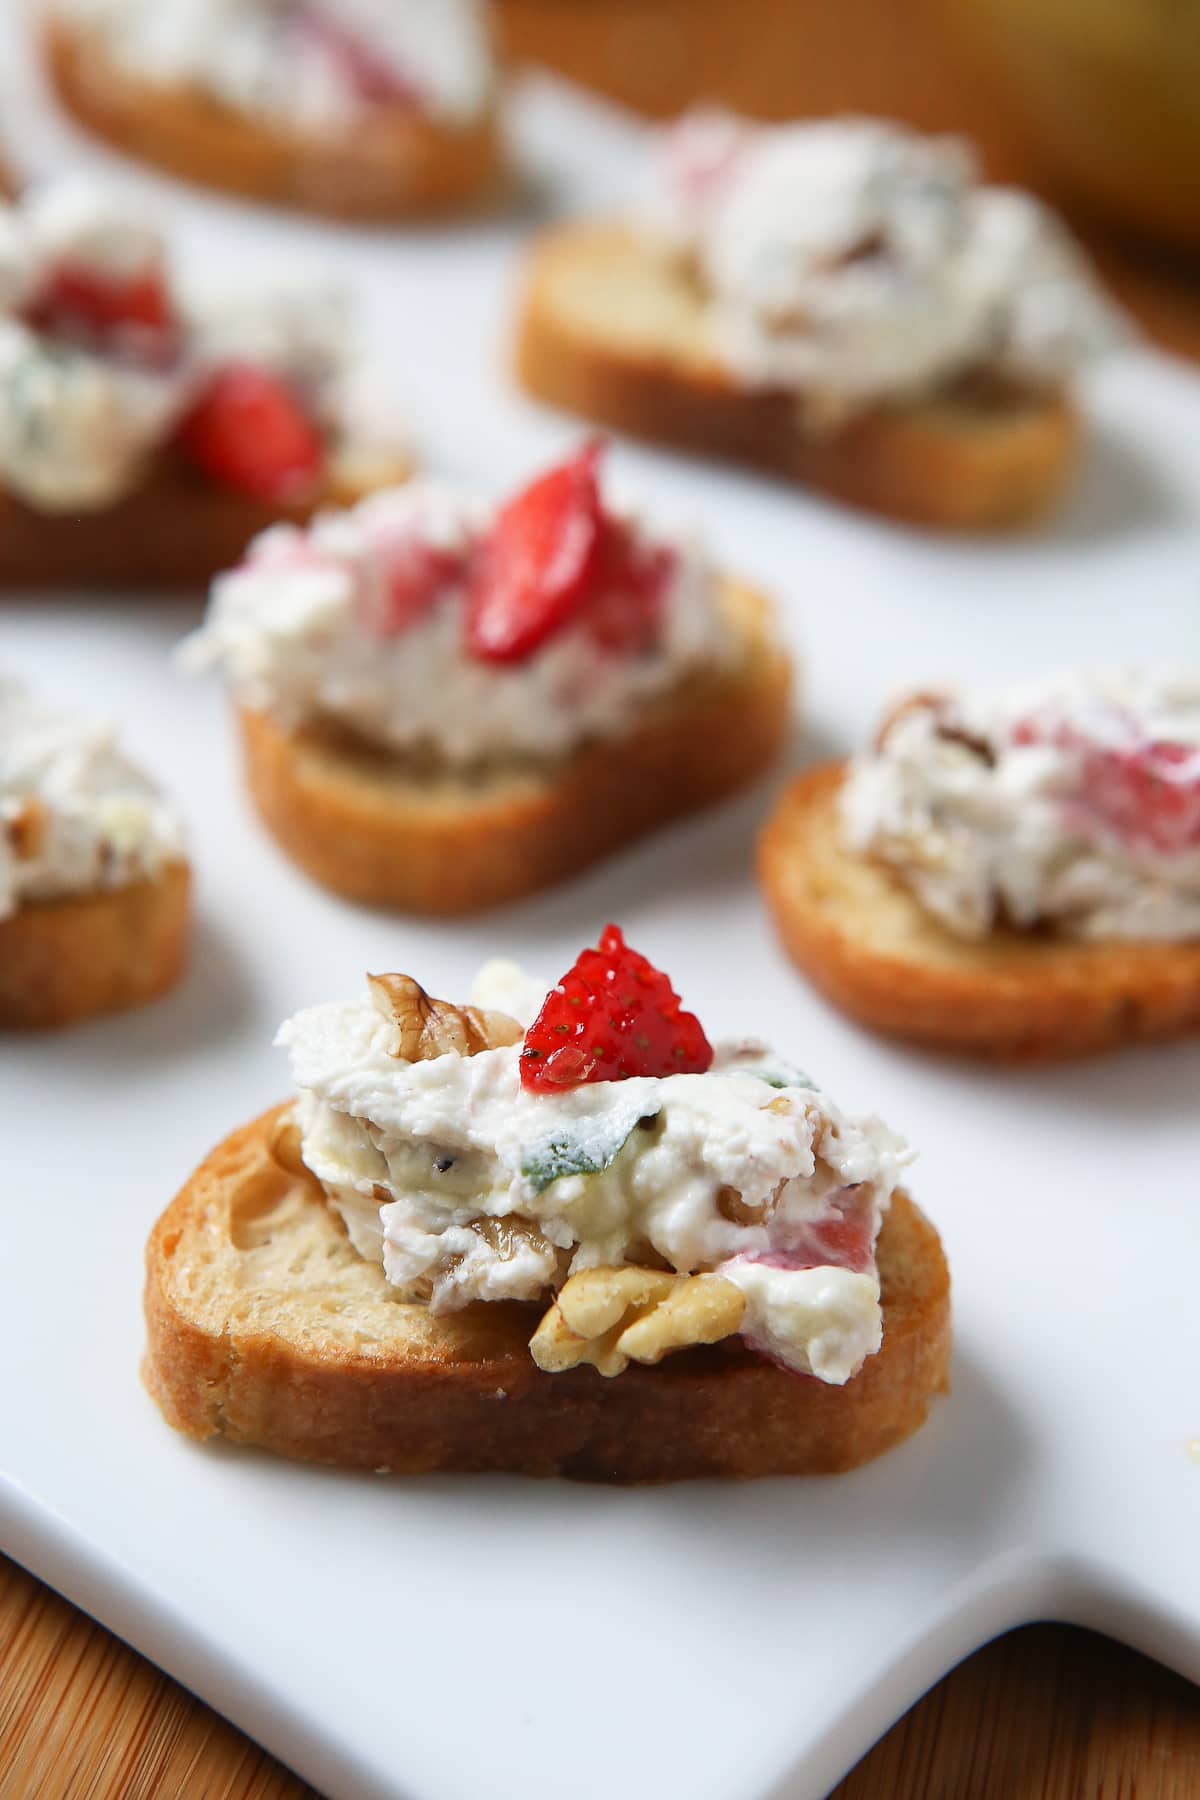 Strawberry Basil Goat Cheese Spread with Walnuts